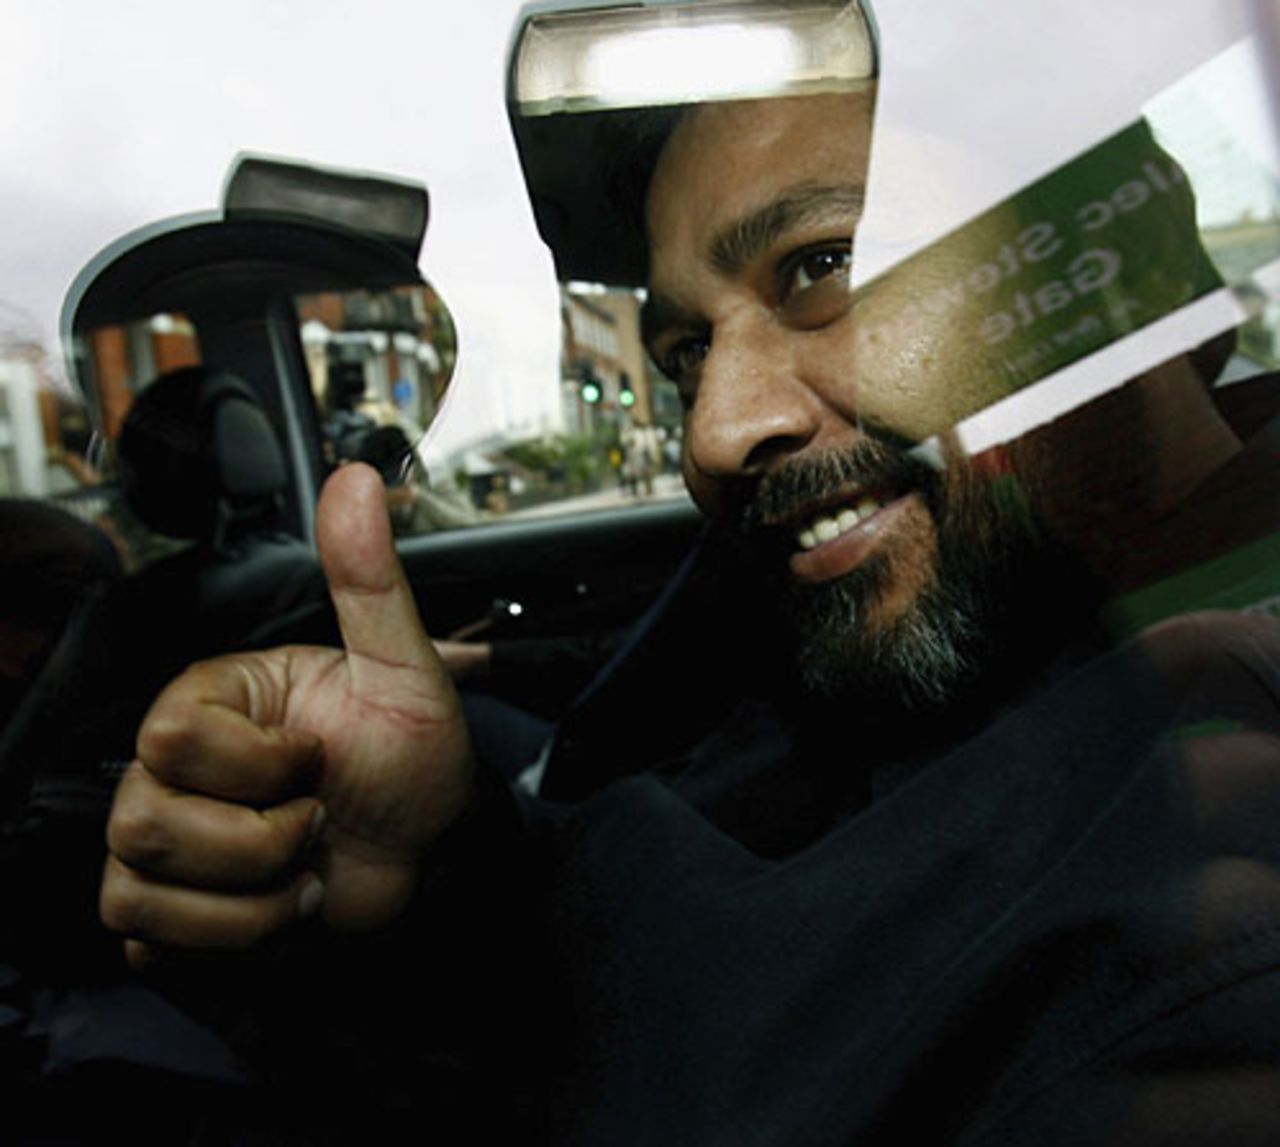 A smiling Inzamam-ul-Haq leaves The Oval on the second day of the ICC hearing, The Oval, September 28, 2006